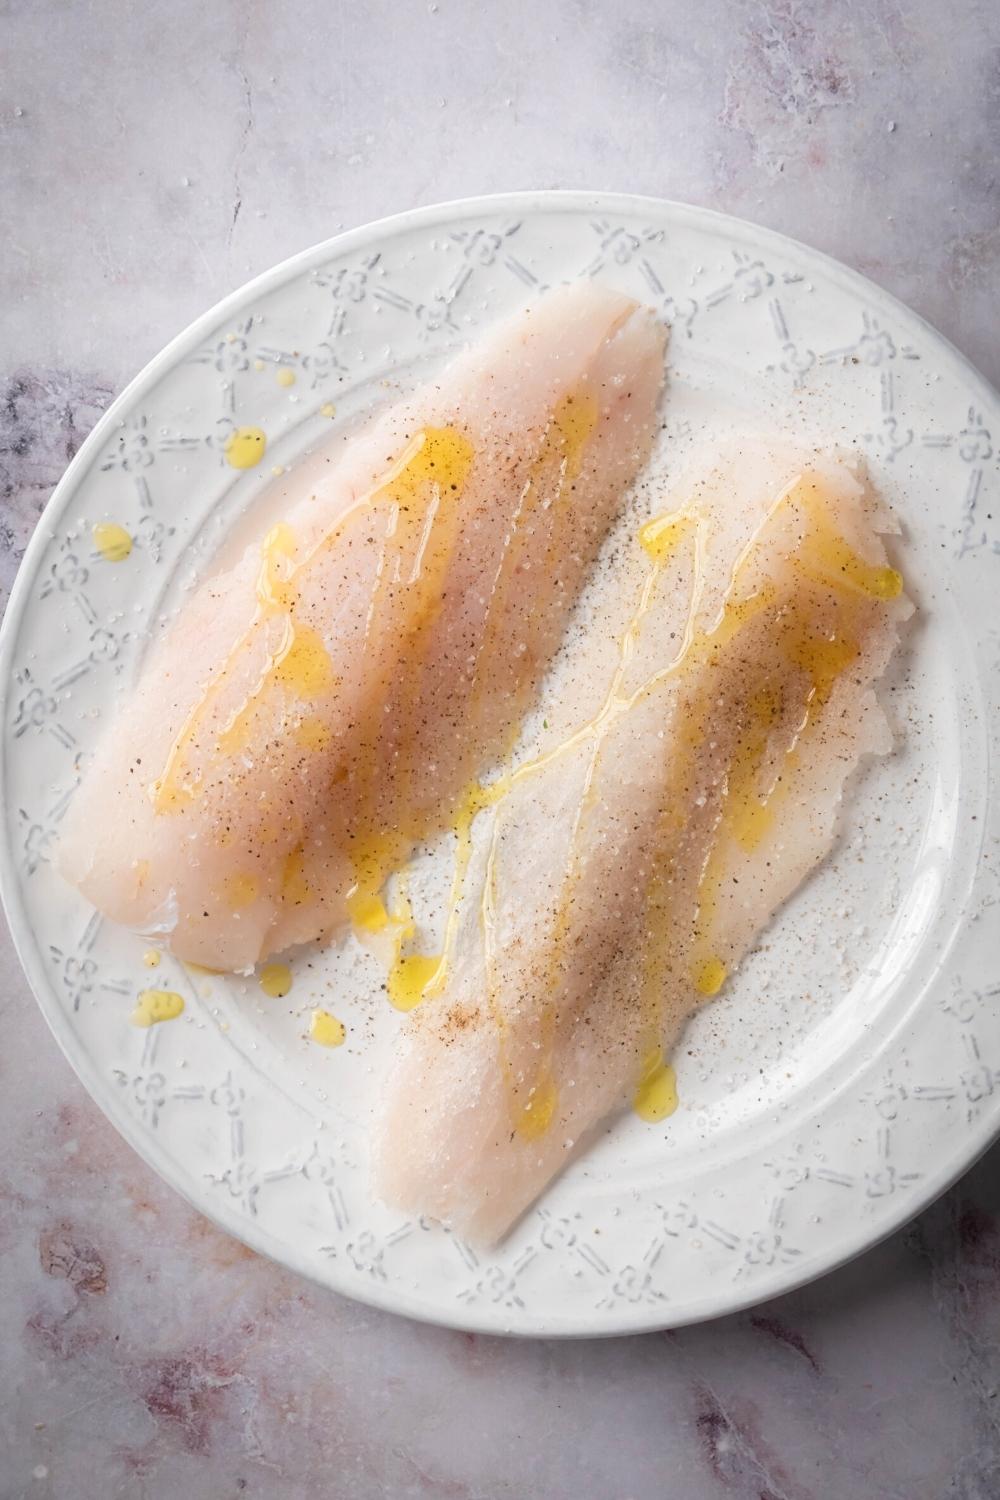 Two raw mahi mahi fillets with olive oil drizzled on them on a white plate.